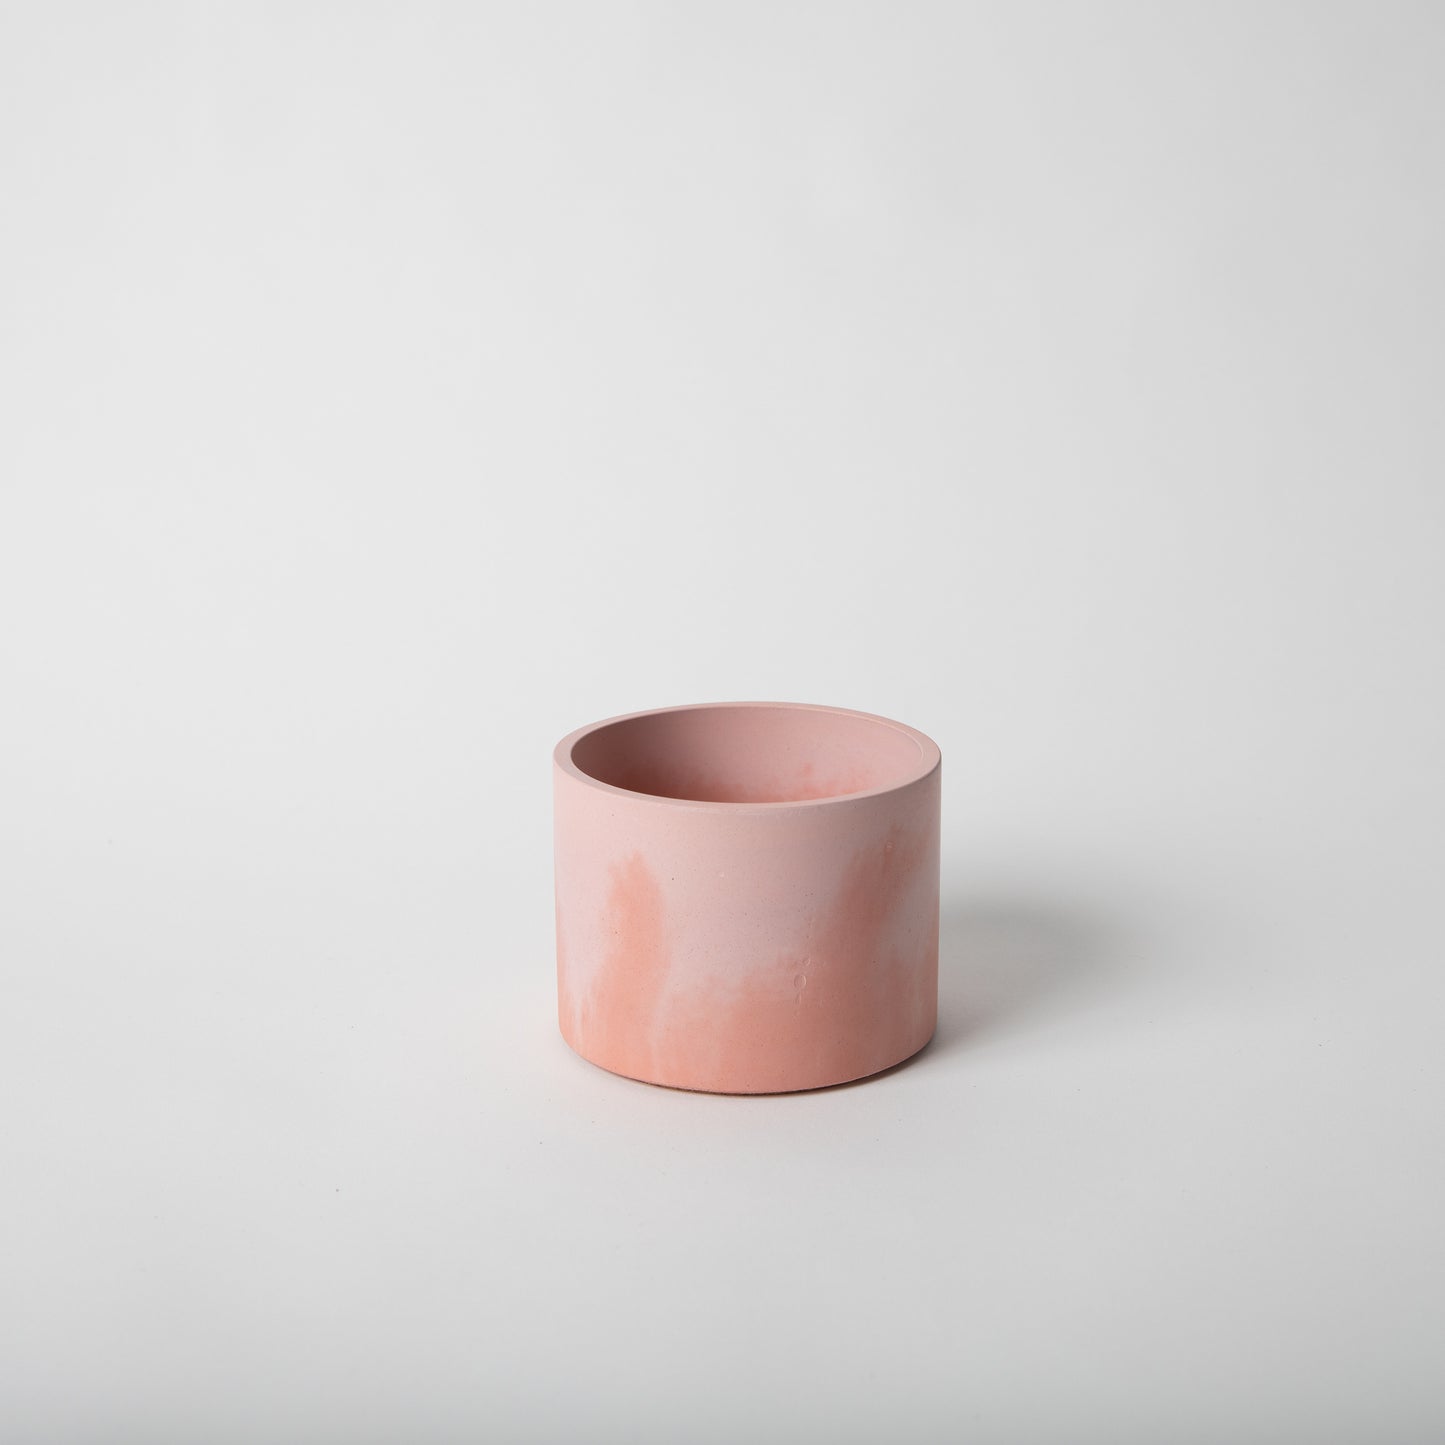 4 inch concrete vessel with cork base in pink and coral.